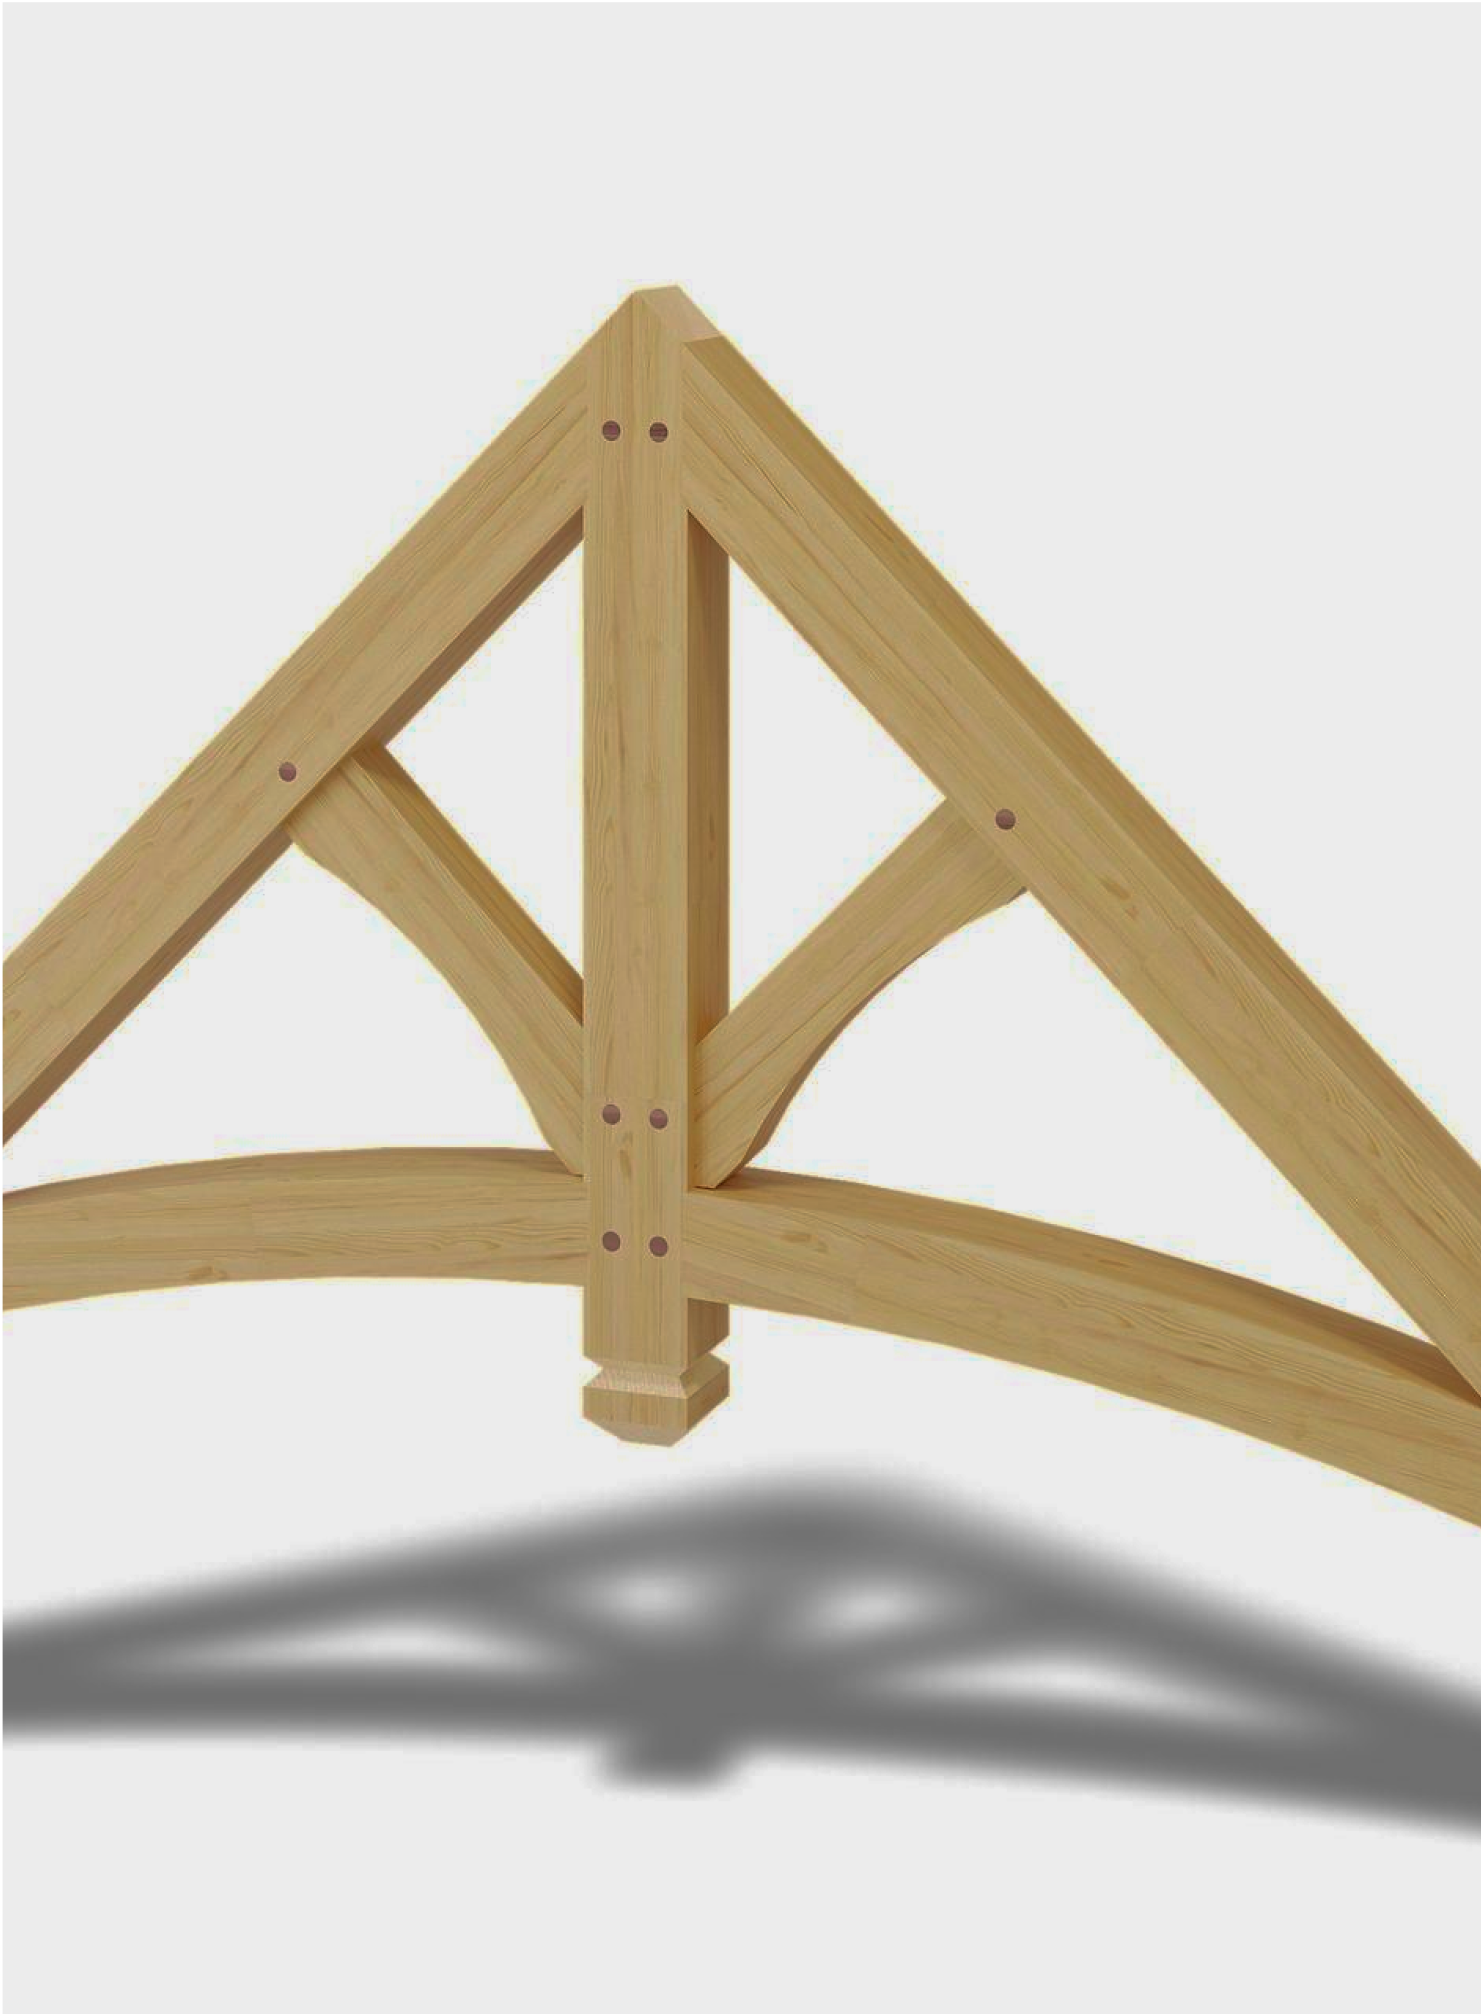 structural timberframe image 2